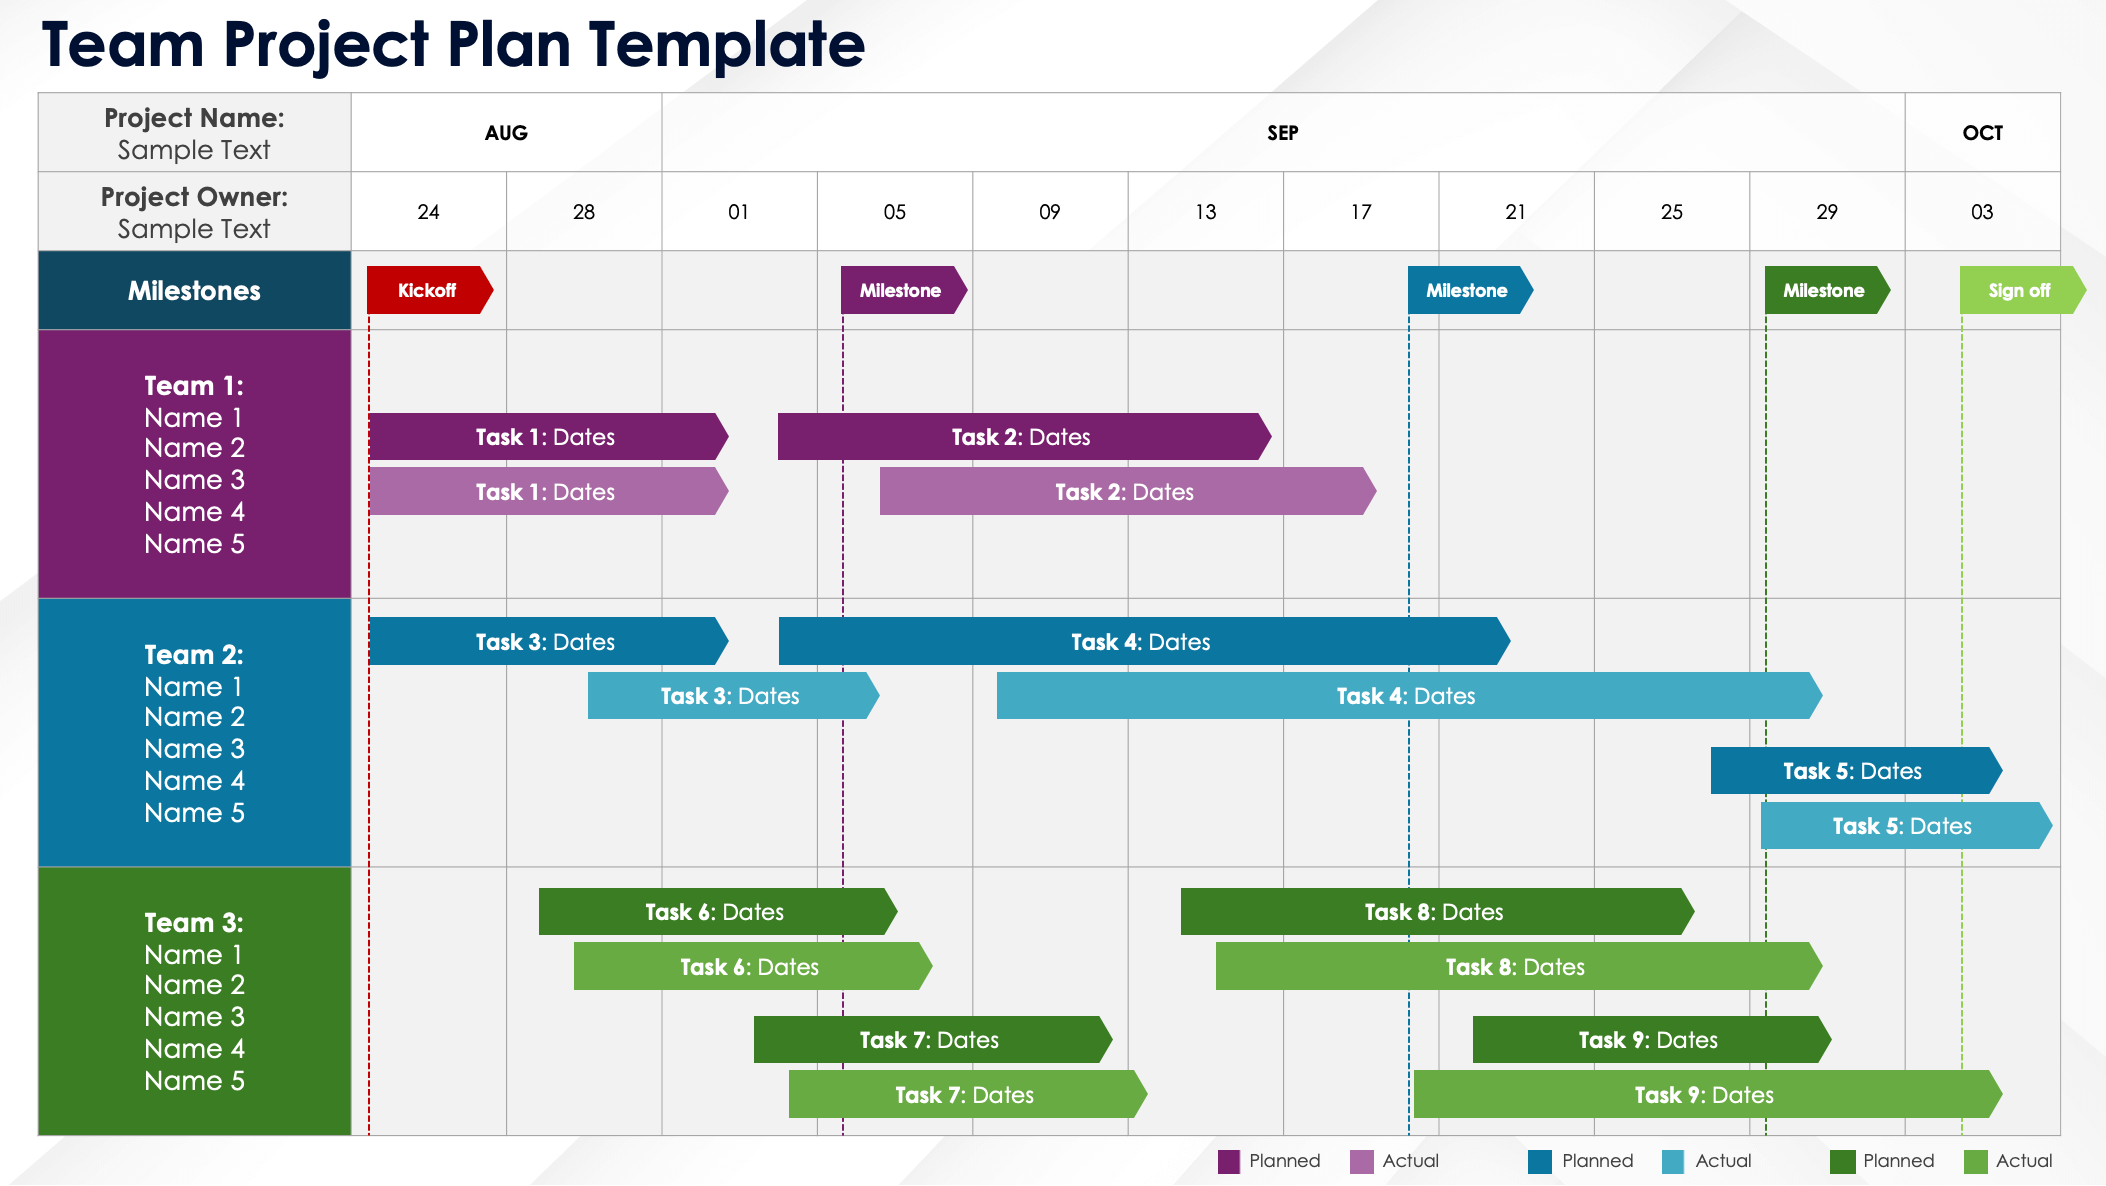 Team Project Plan Template